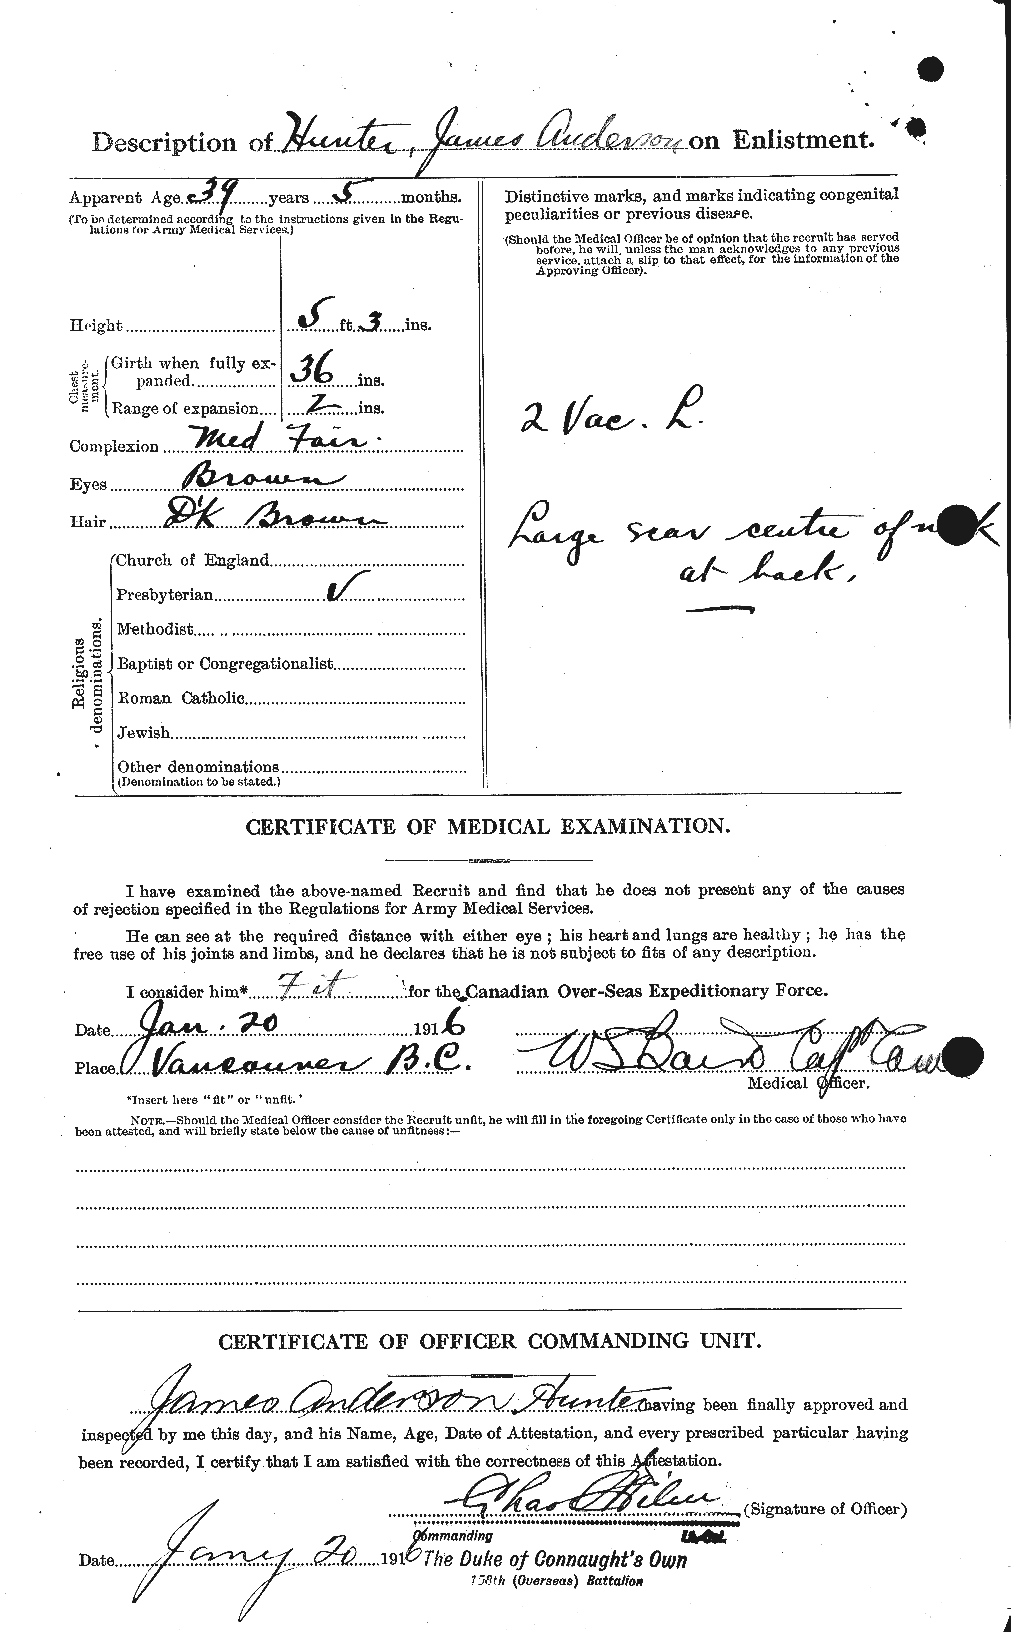 Personnel Records of the First World War - CEF 410282b